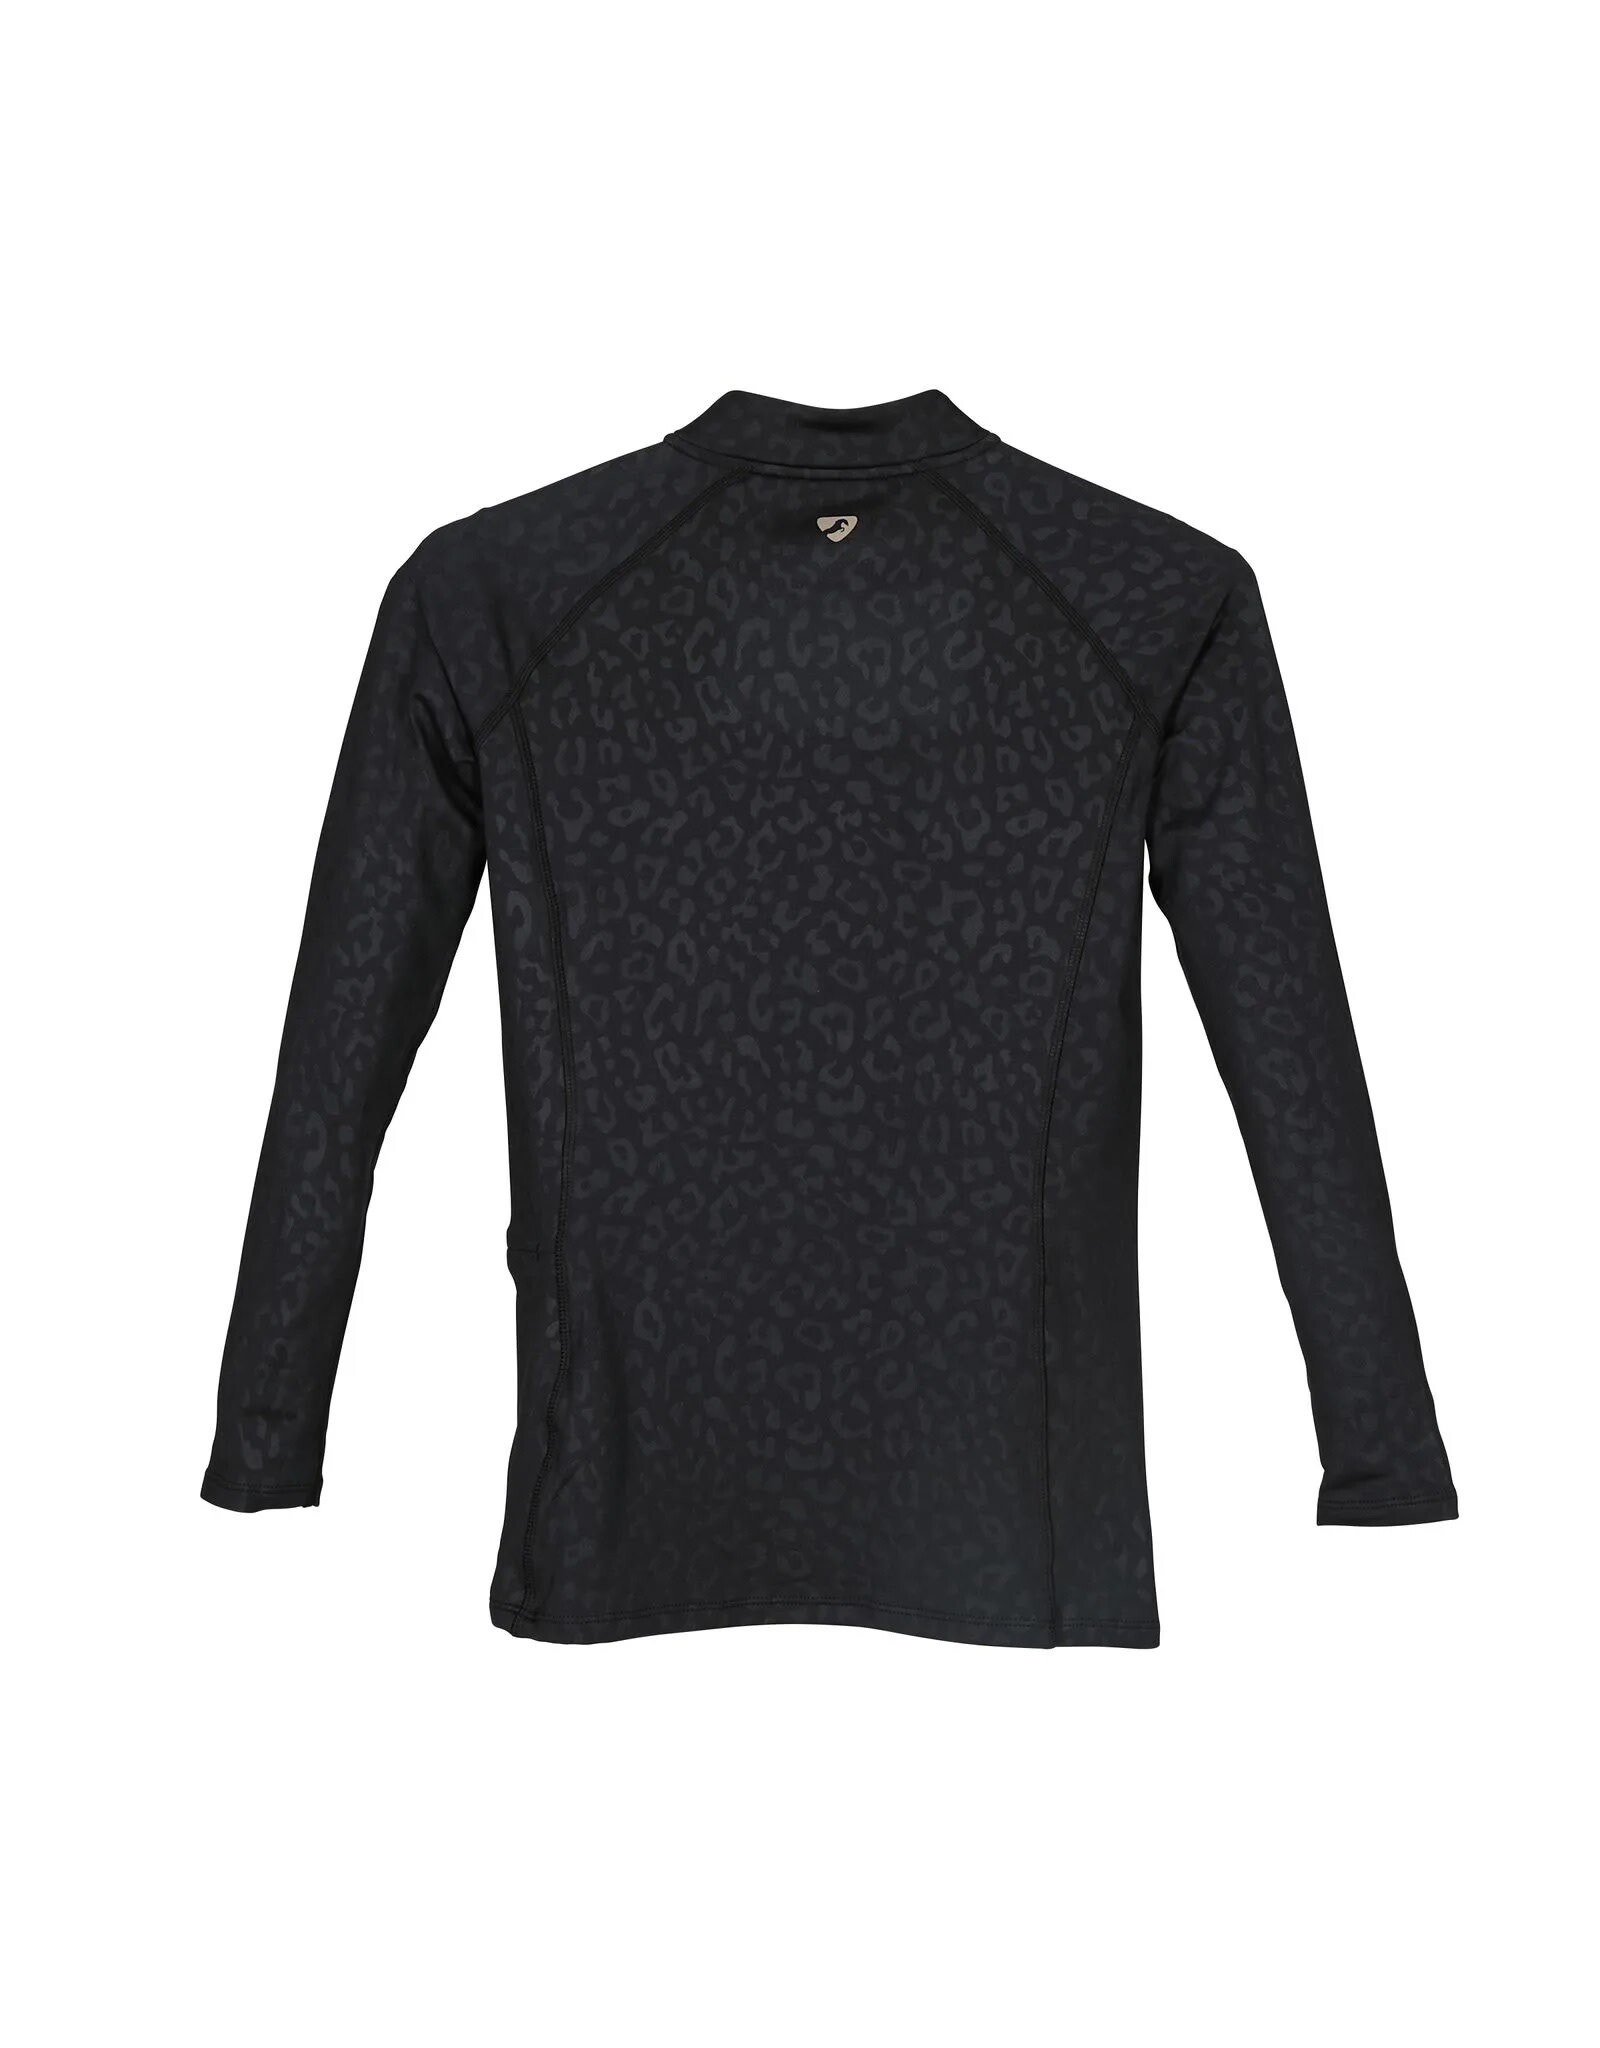 Aubrion Revive Base Layer Youth